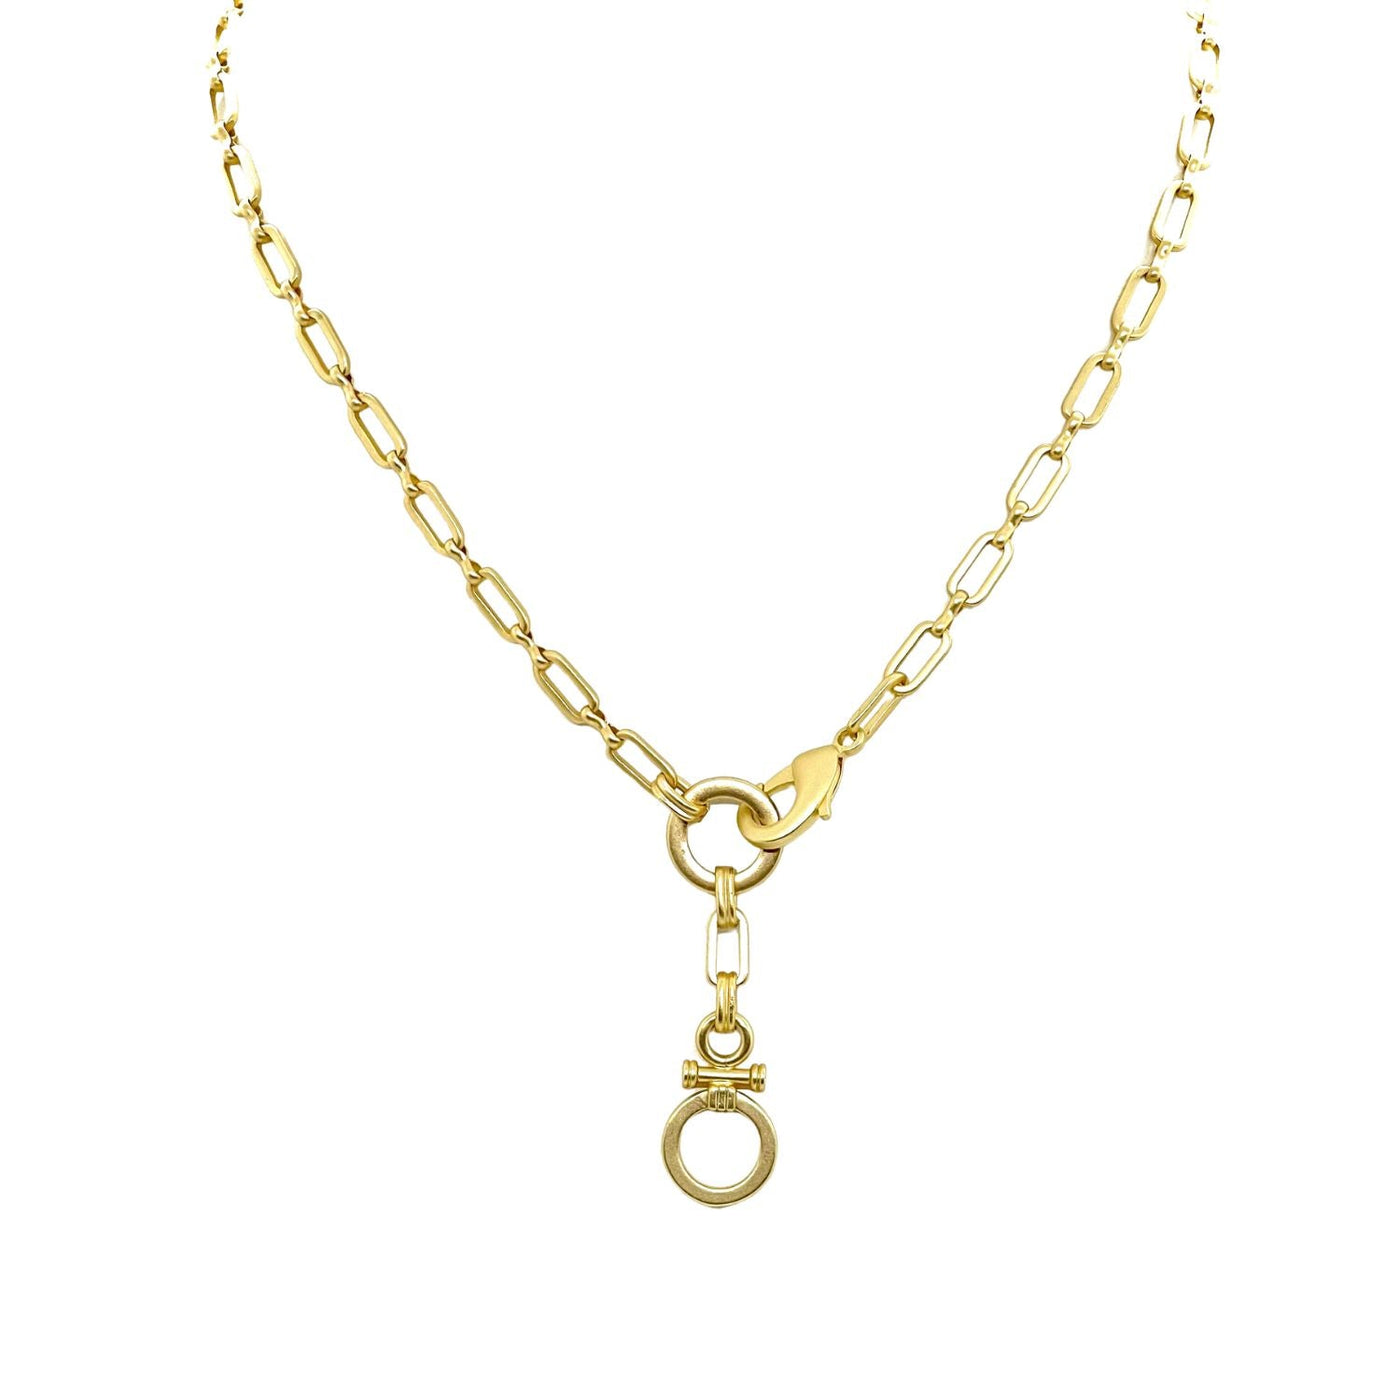 Matte Gold Paperclip Chain Necklace With Circle Bar Pendant